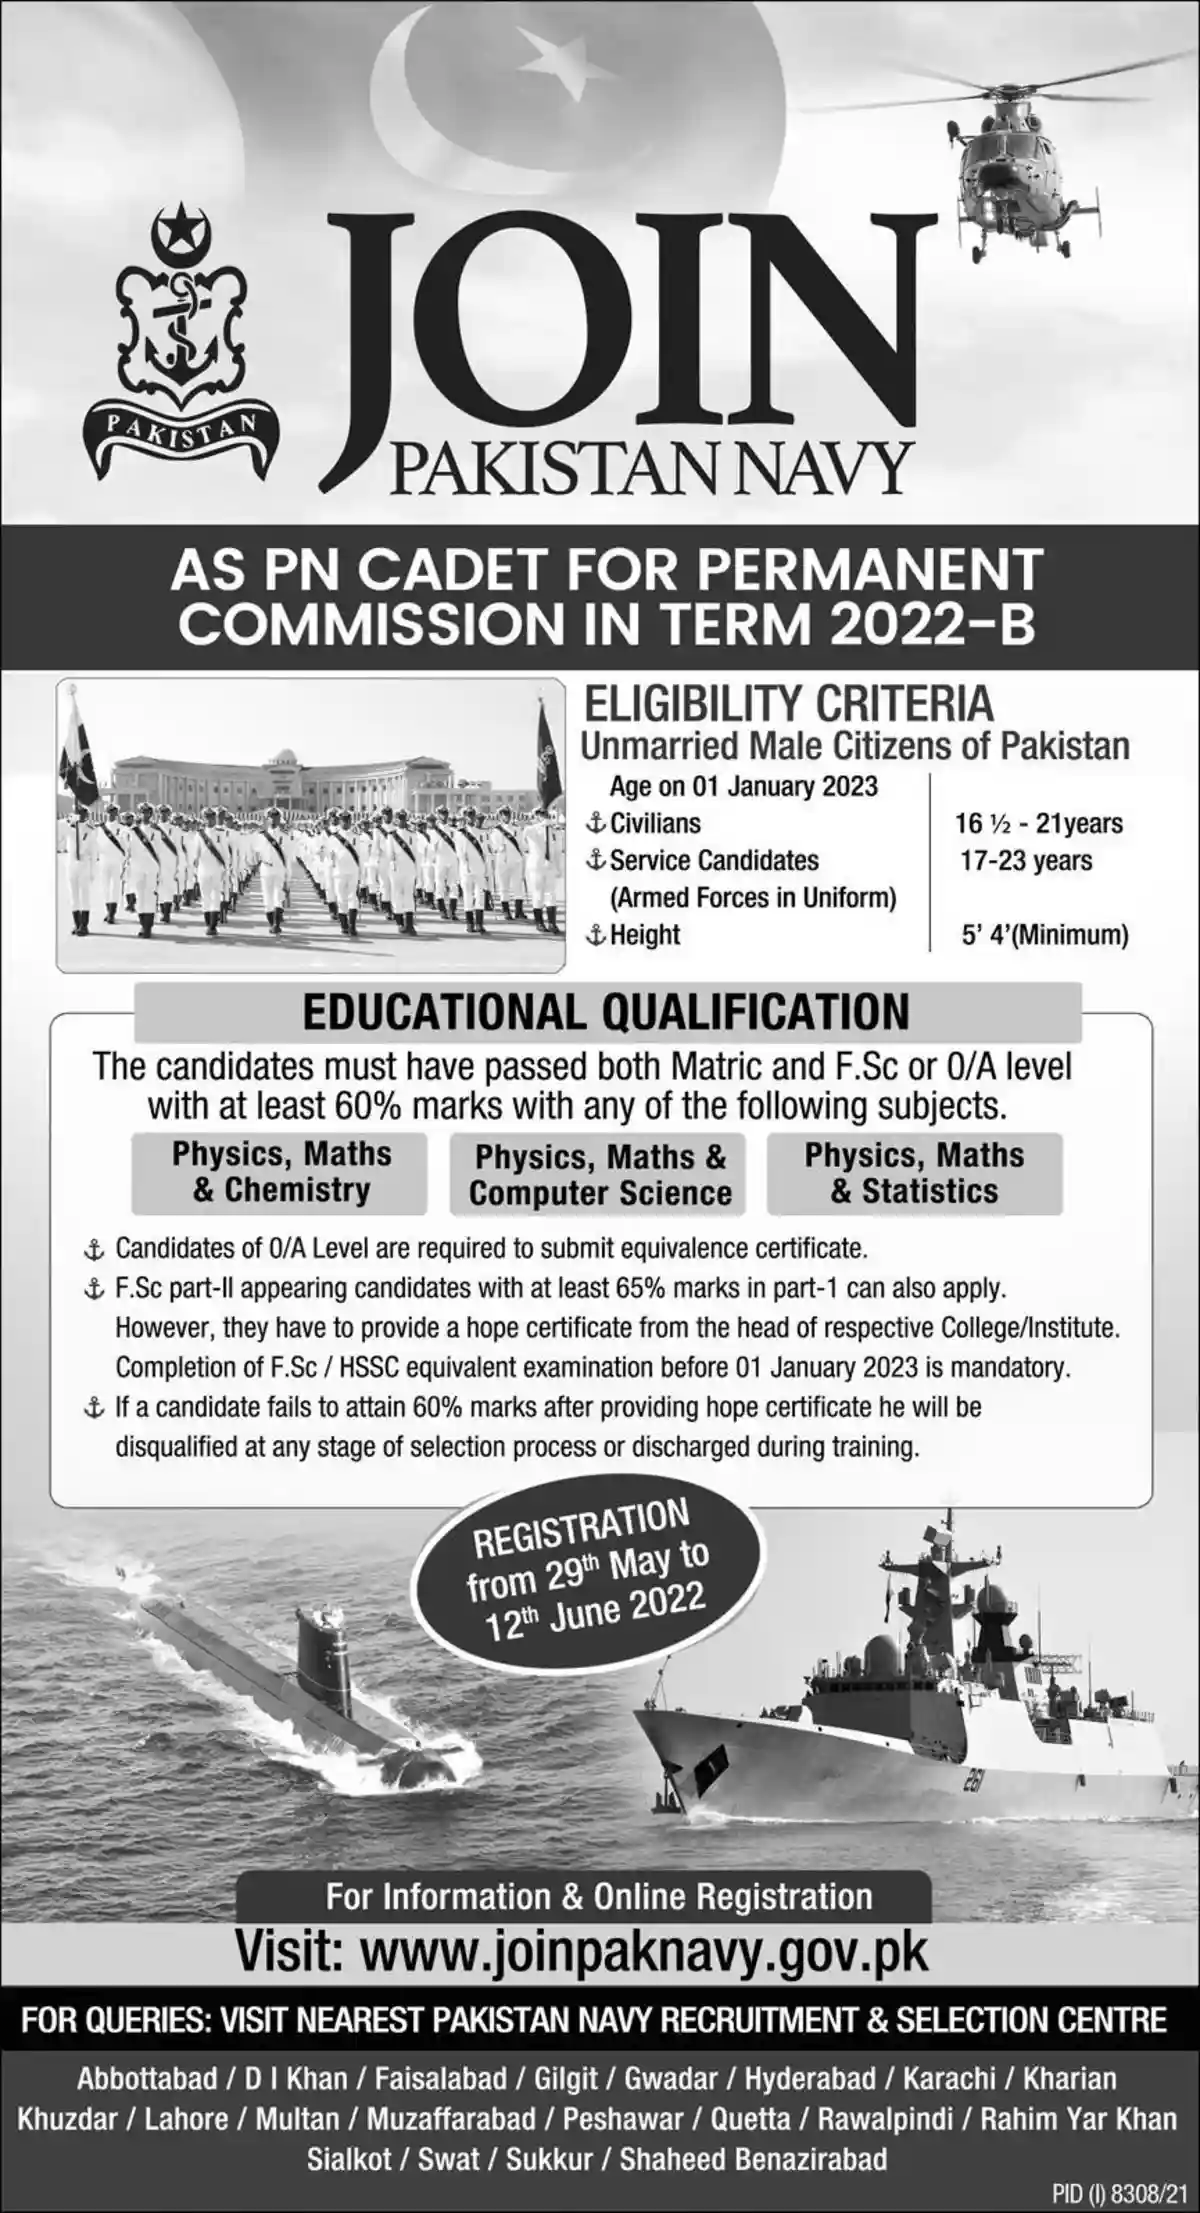 Join Pak Navy Jobs 2022 as PN Cadet Permanent Commission Term 2022-B